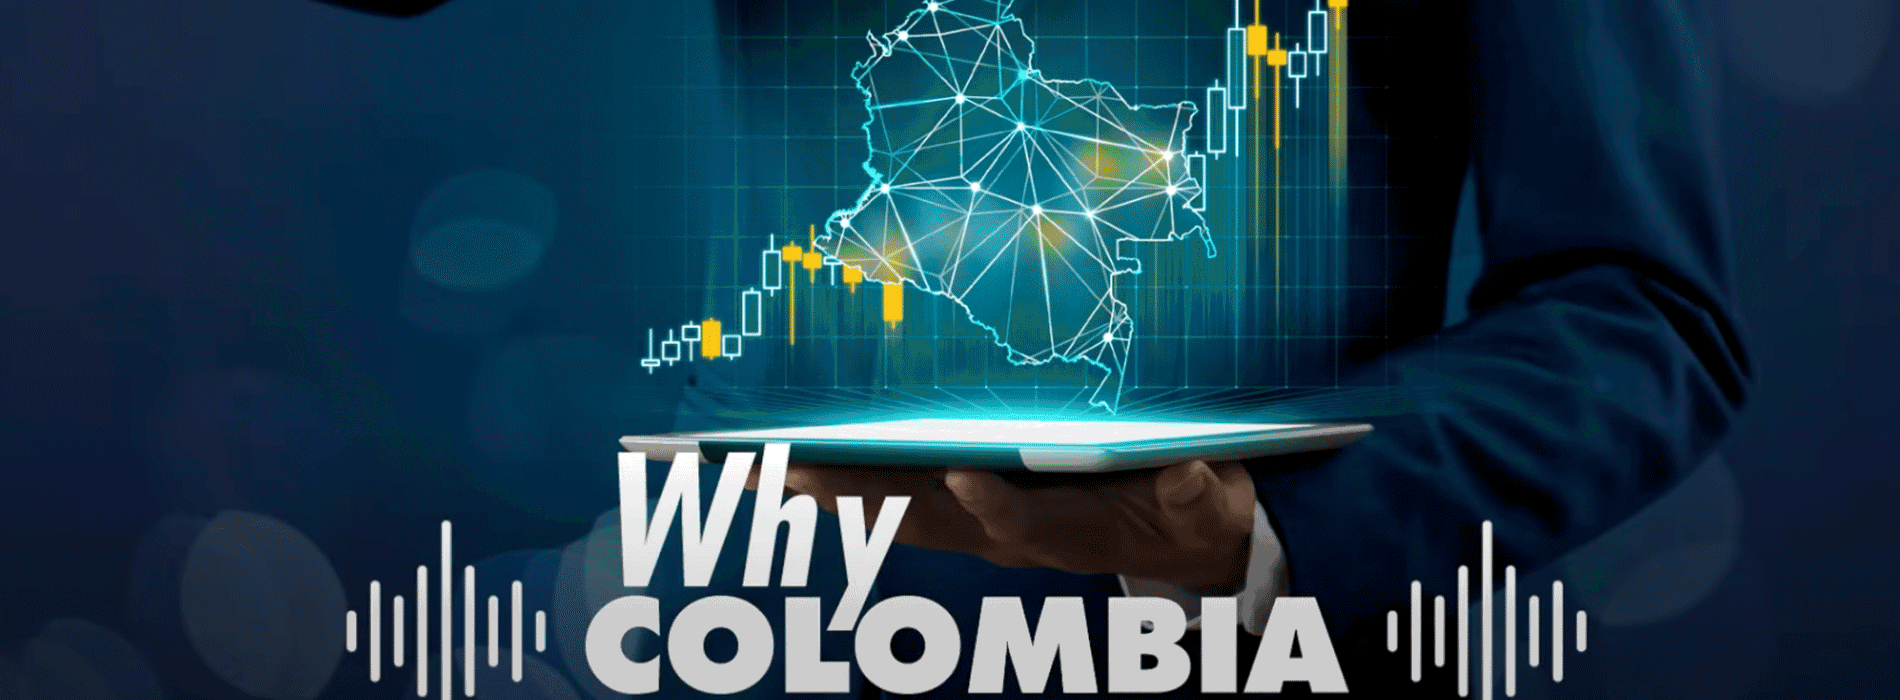 Why Colombia? banner 